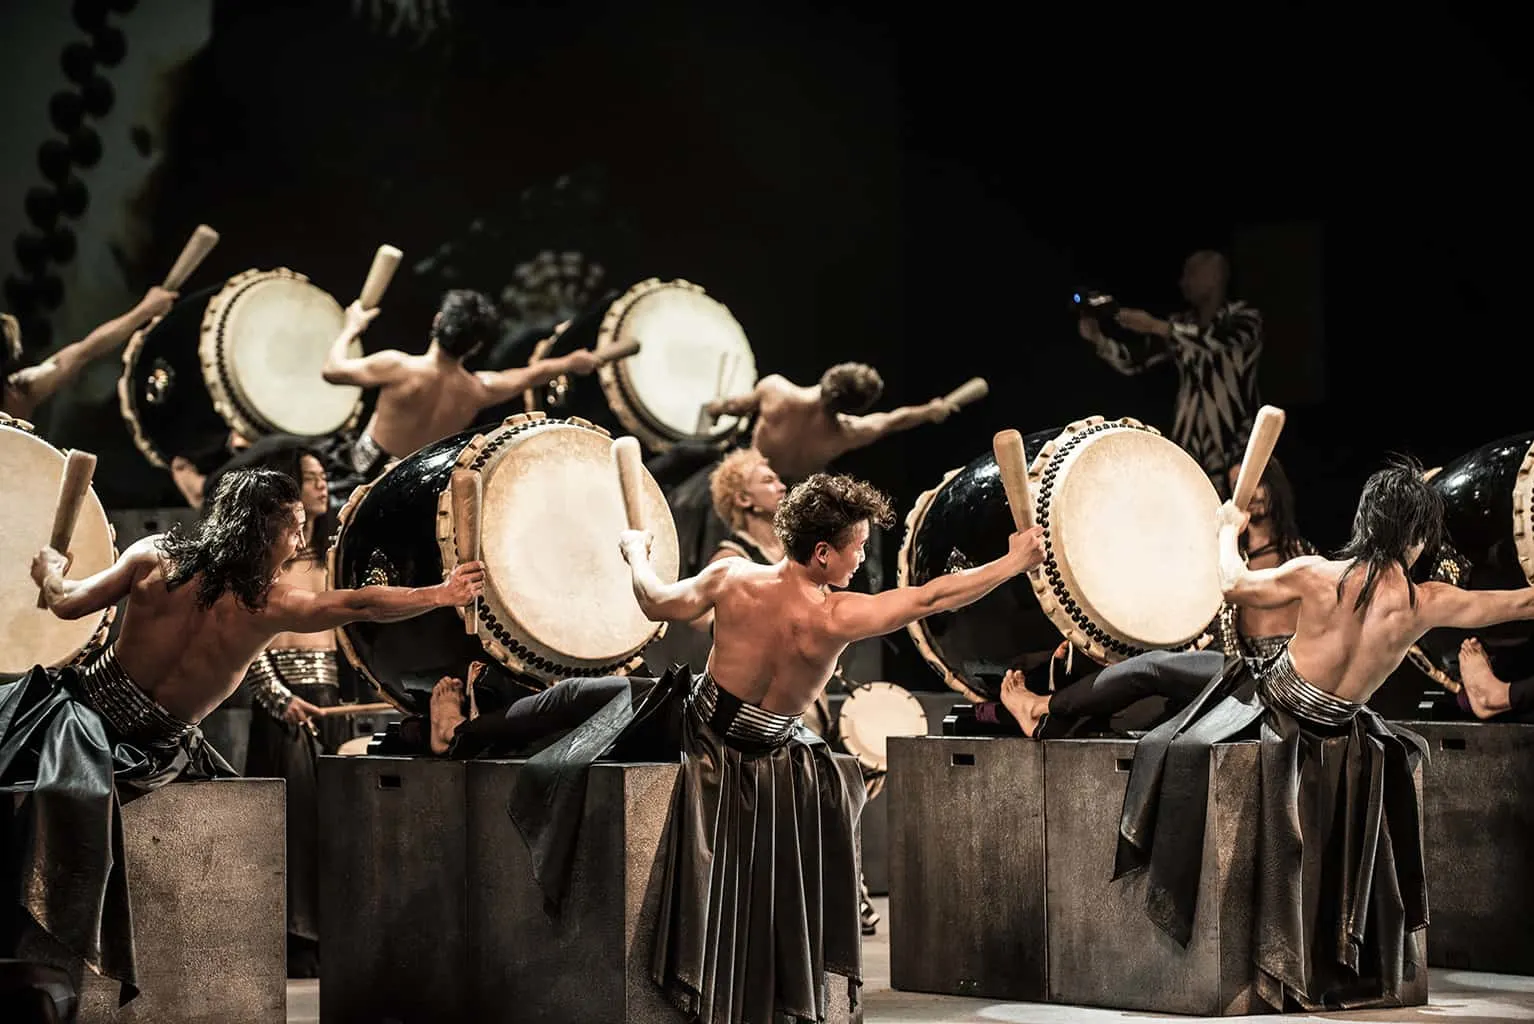 DRUM TAO is known for combining music and dance to reflect Japanese tradition while incorporating other Asian cultural influences.  Breaking past the traditional notions of taiko, DRUM TAO continues to create an entirely new art form that is modern yet retains sense of tradition.